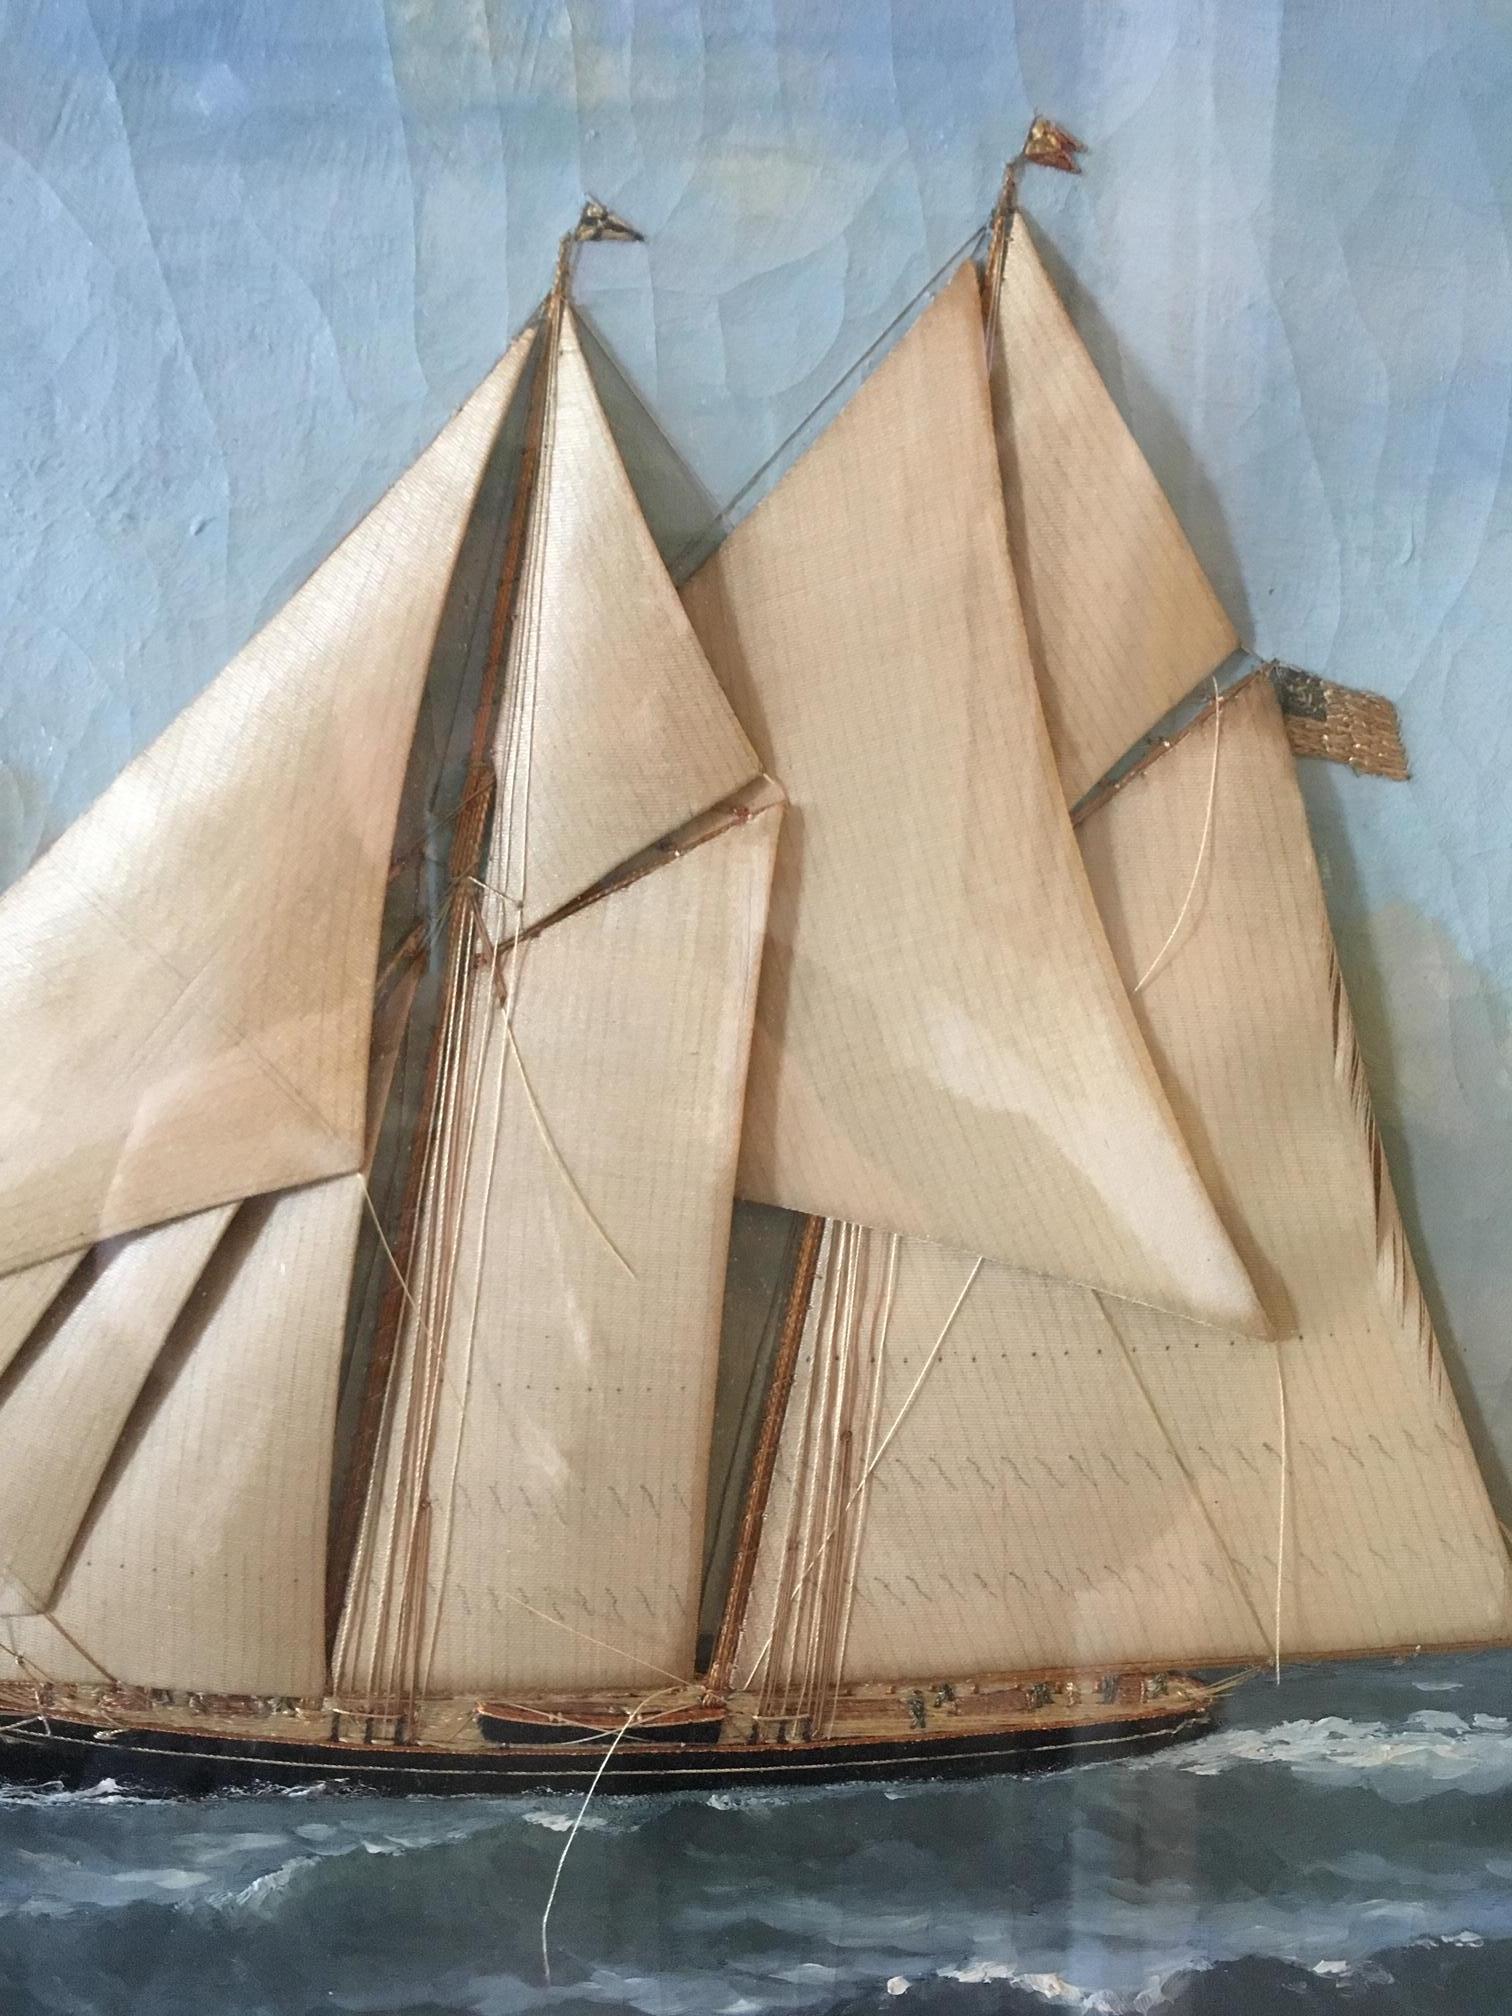 Silk mounted and embroidered portrait of a Schooner-Rigged Yacht, hand tied onto an oil on canvas Seascape, by Thomas Willis (Danish-American: circa 1850-1925), circa 1880, featuring a topsail schooner closed hauled on starboard tack under full